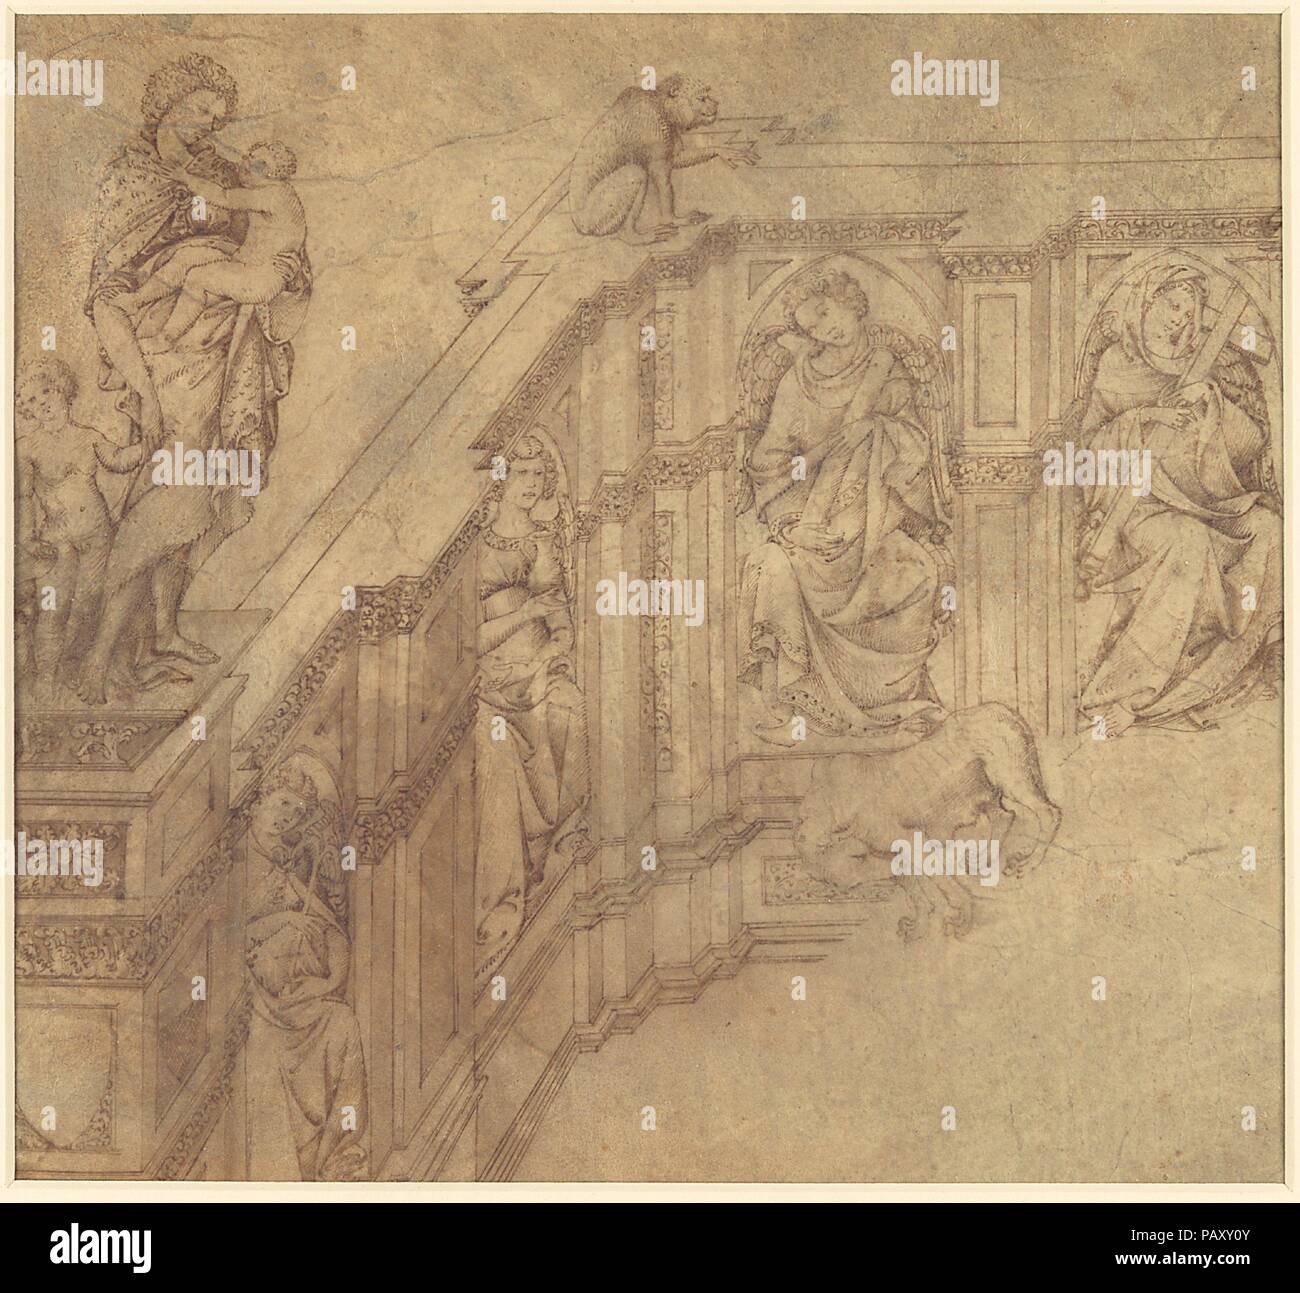 Design Fragment for the Left Side of the 'Fonte Gaia' in Siena. Artist: Jacopo della Quercia (Jacopo di Pietro d'Angelo di Guarnieri) (Italian, Siena 1374?-1438 Siena). Dimensions: 7-13/16 x 8-7/16 in.  (20.1 x 21.4 cm). Date: 1415-16.  This is one of the most historically important early Italian drawings in a United States collection, and is associated with a famous sculptural project in Renaissance Italy. The details of the project are complex but illuminate the crucial role of this drawing in the development of the commission. They are summarized here with new research.   In 1408, Jacopo de Stock Photo